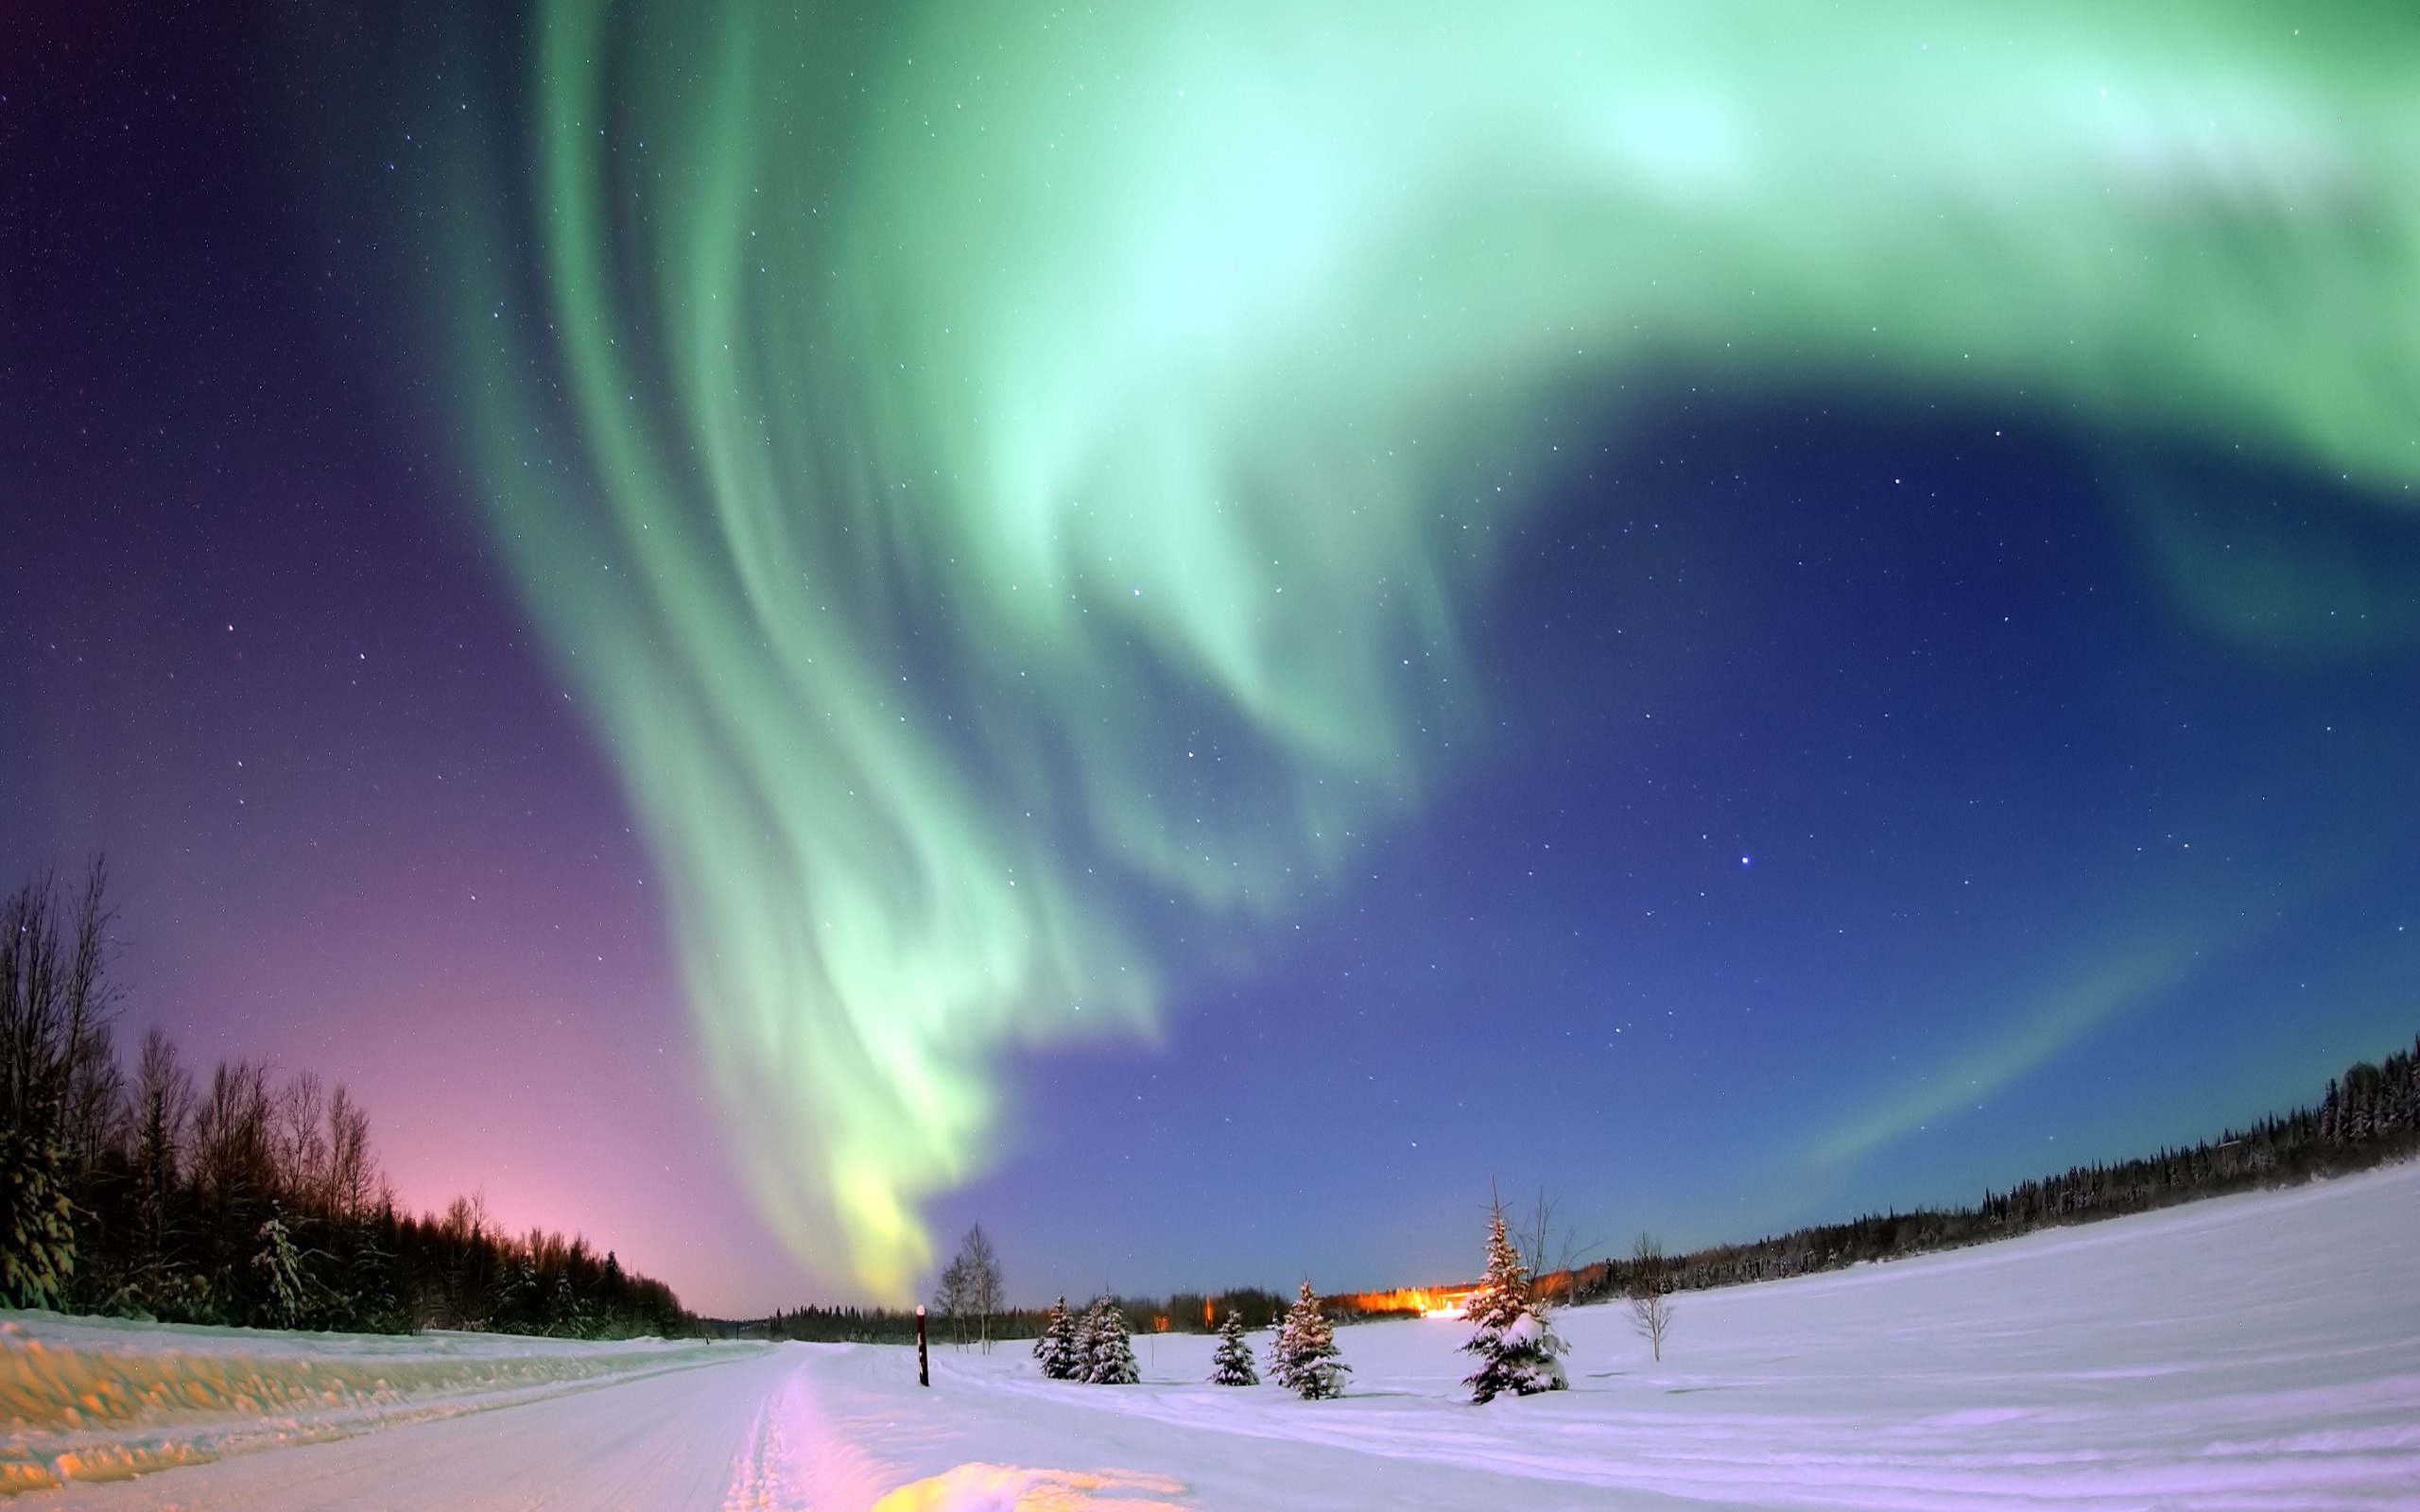 Natural wonders of the Northern Lights HD Wallpaper (2) #22 - 2560x1600